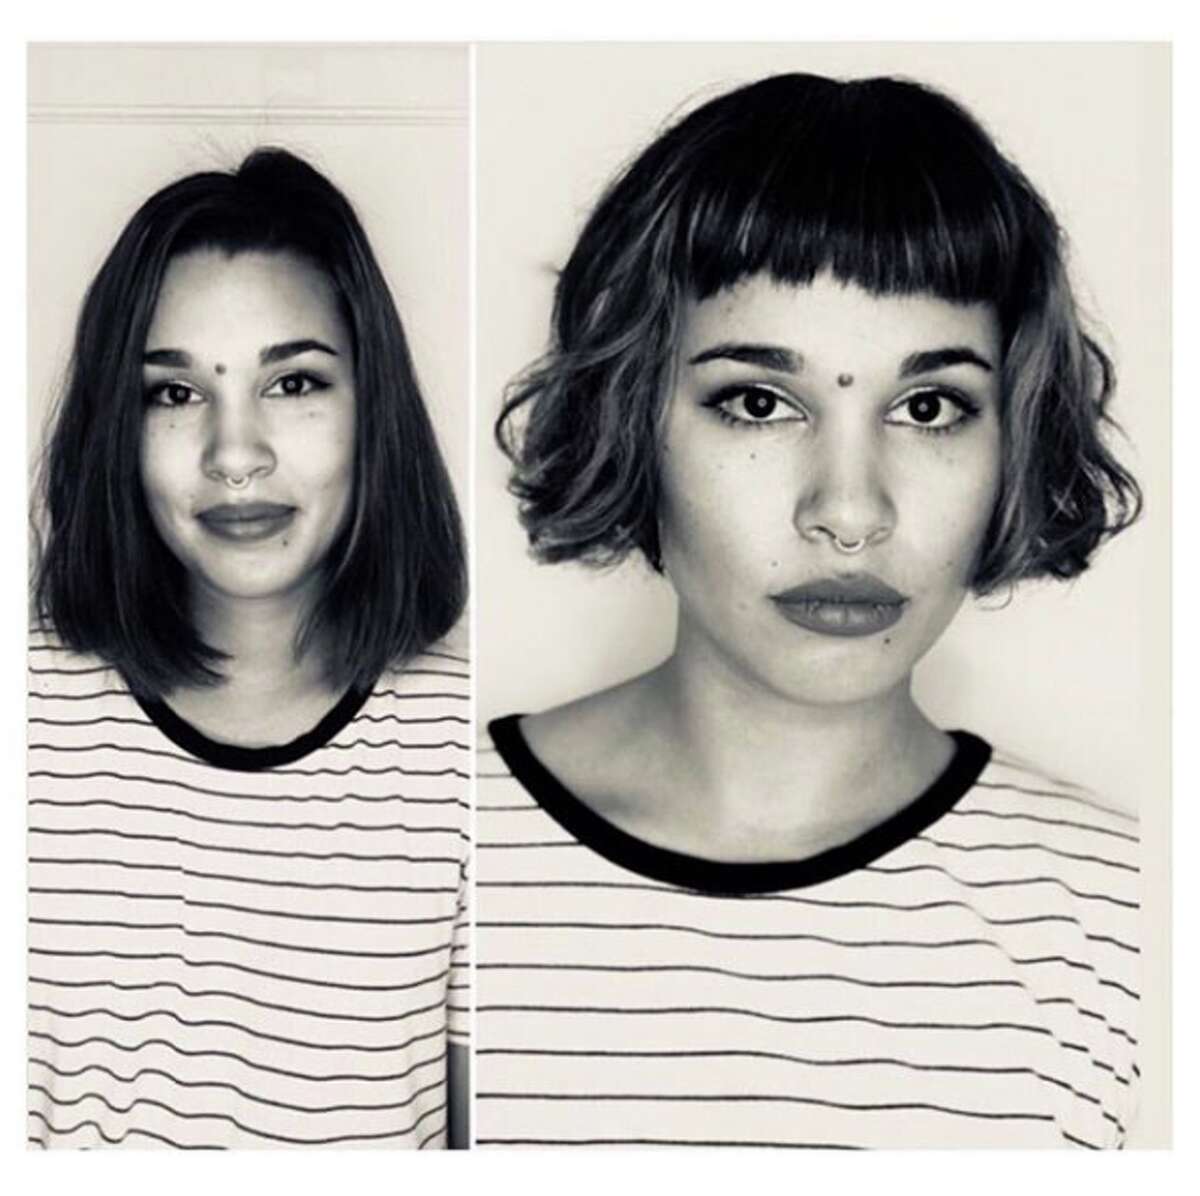 Before and after images of haircuts at Edo Salon and Gallery in San Francisco. Salon owner Jayne Matthews estimates at least 80 percent of clients find Edo from Instagram (@edosalonandgallery).